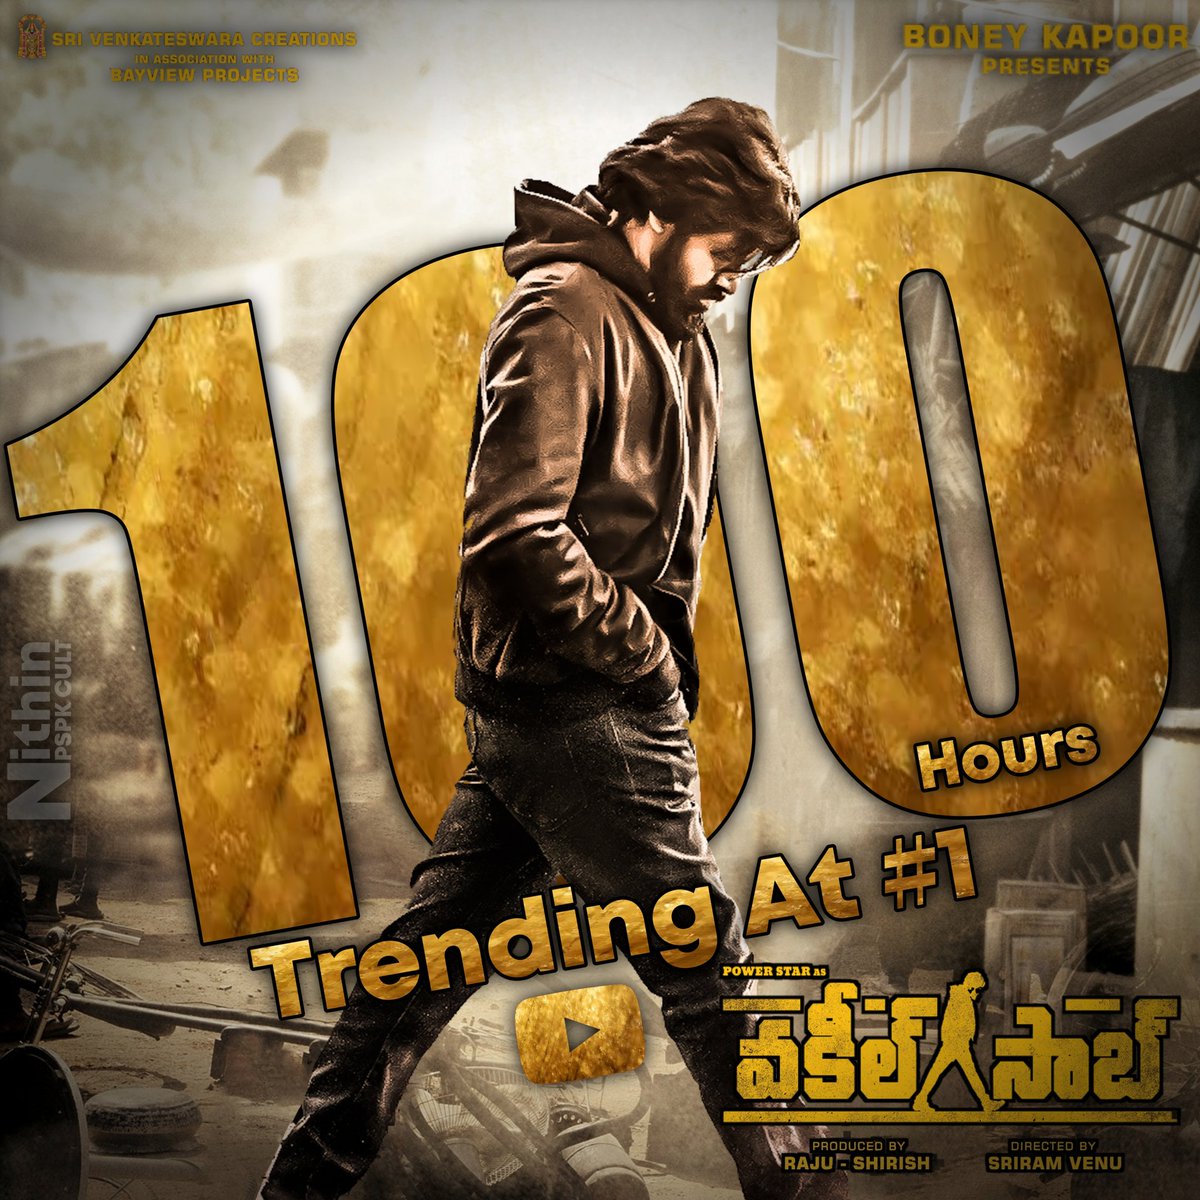 Here's Poster Design From My Side  #VakeelSaabTeaser Still Trending #1 From 100+ Hours in @YouTubeIndia 💥🤩

🔗 : youtu.be/FWKw9mdvS9w

#VakeelSaab || @PawanKalyan